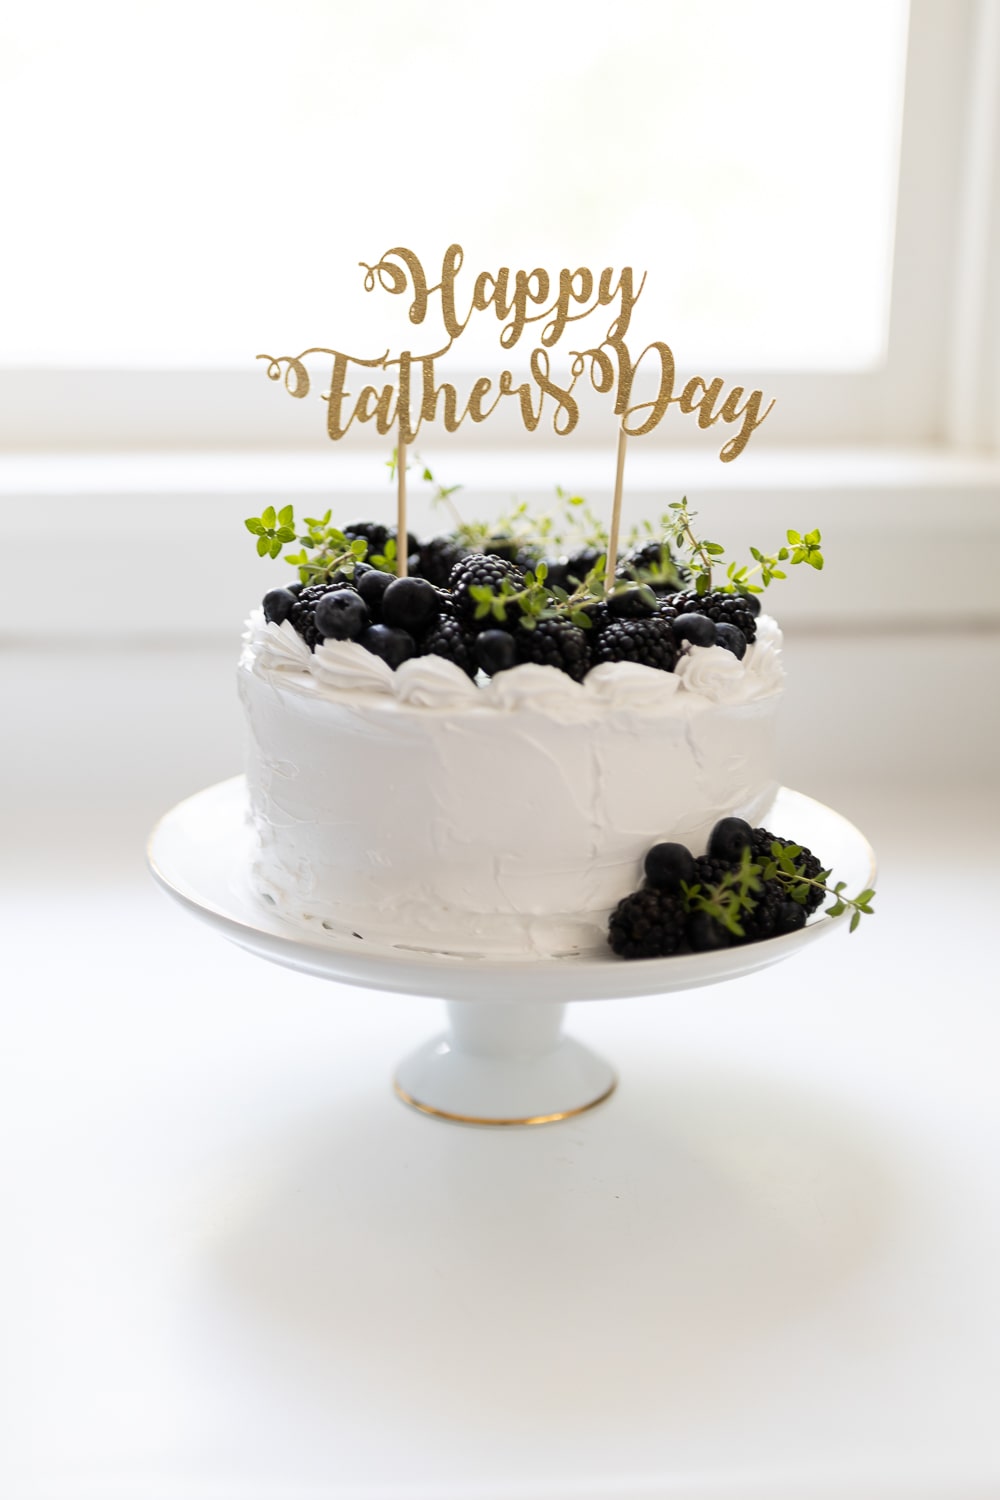 DIY Father's Day cake topper created by blogger Stephanie Ziajka on Diary of a Debutante